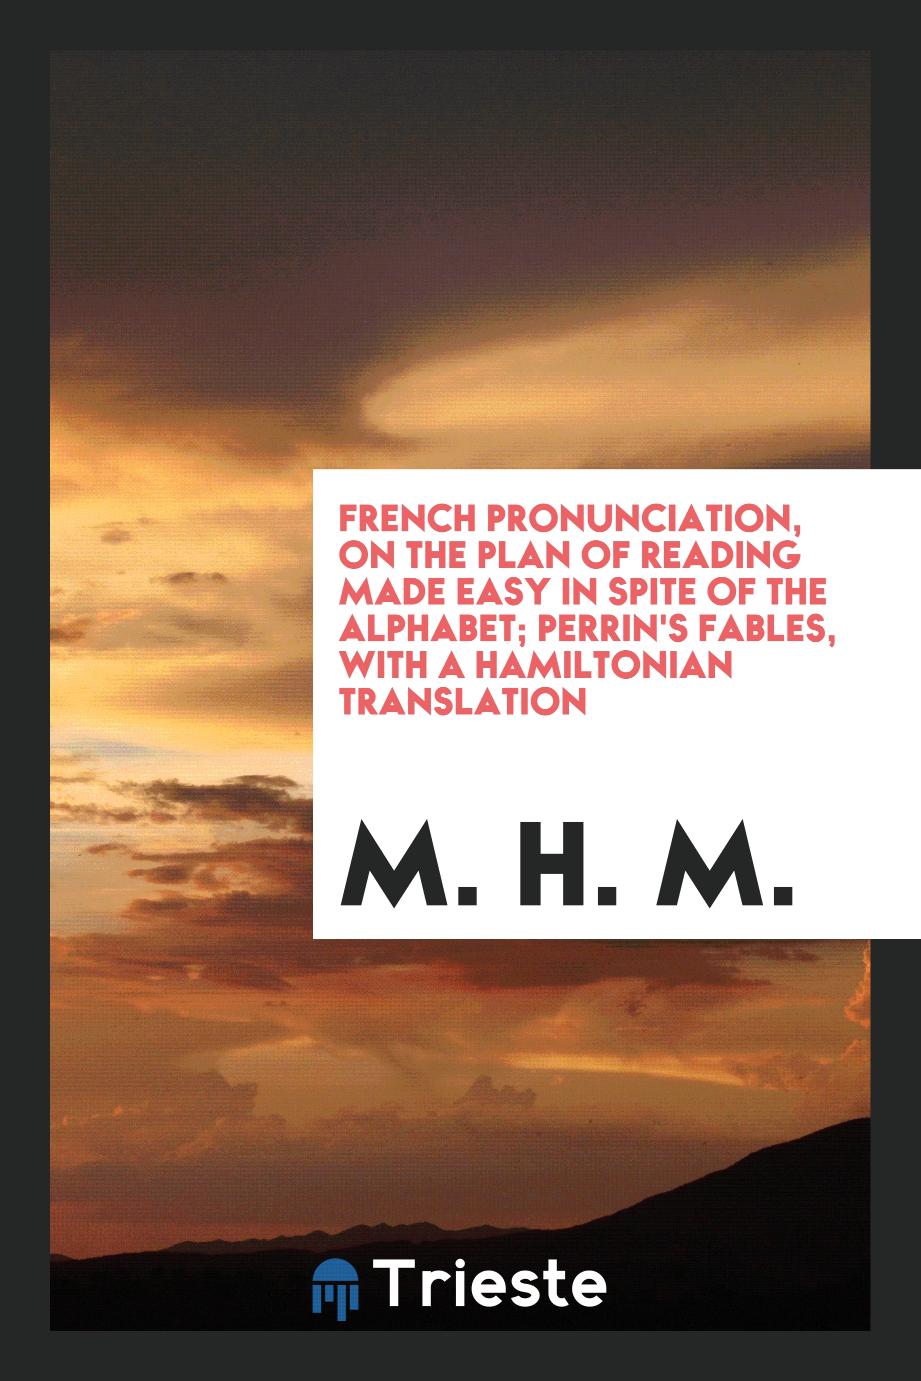 M. H. M. - French Pronunciation, on the Plan of Reading Made Easy in Spite of the Alphabet; Perrin's Fables, with a Hamiltonian Translation